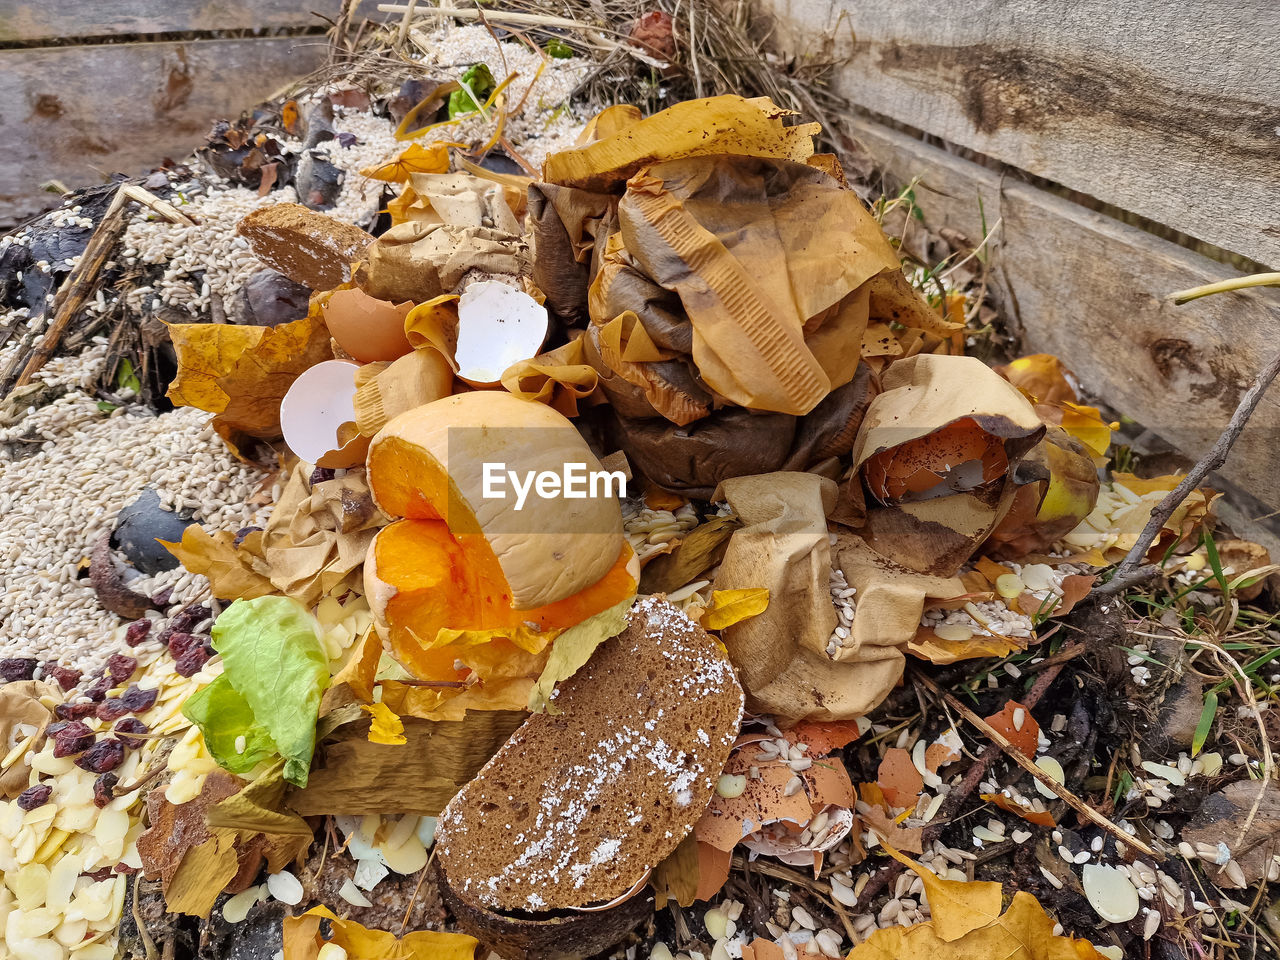 autumn, leaf, high angle view, nature, day, no people, land, plant part, field, outdoors, dry, yellow, large group of objects, wood, leaves, abundance, plant